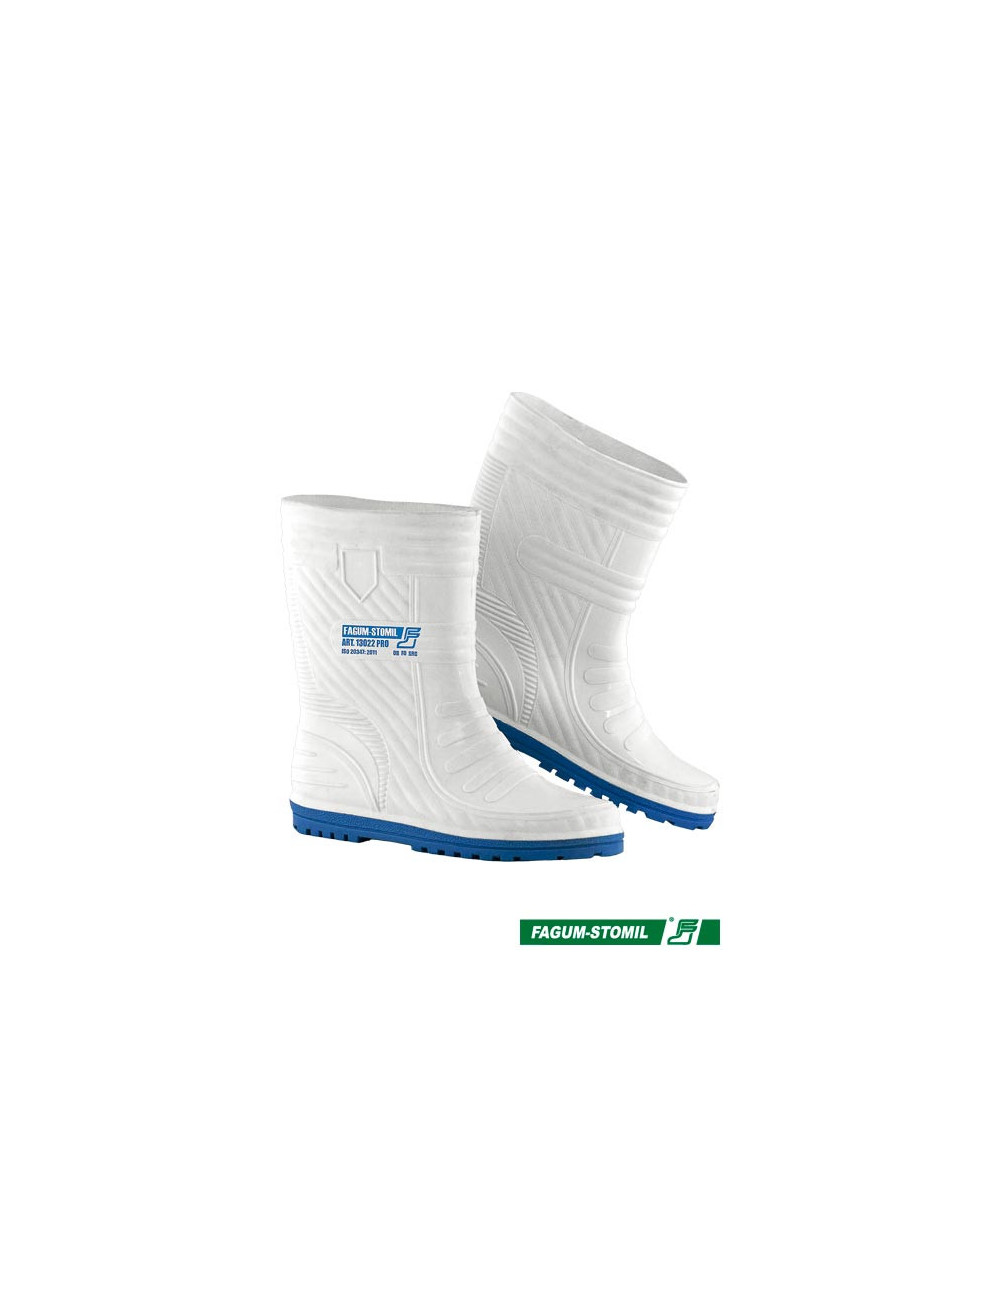 Professional shoes bfsk13022pro in white Fagum-stomil